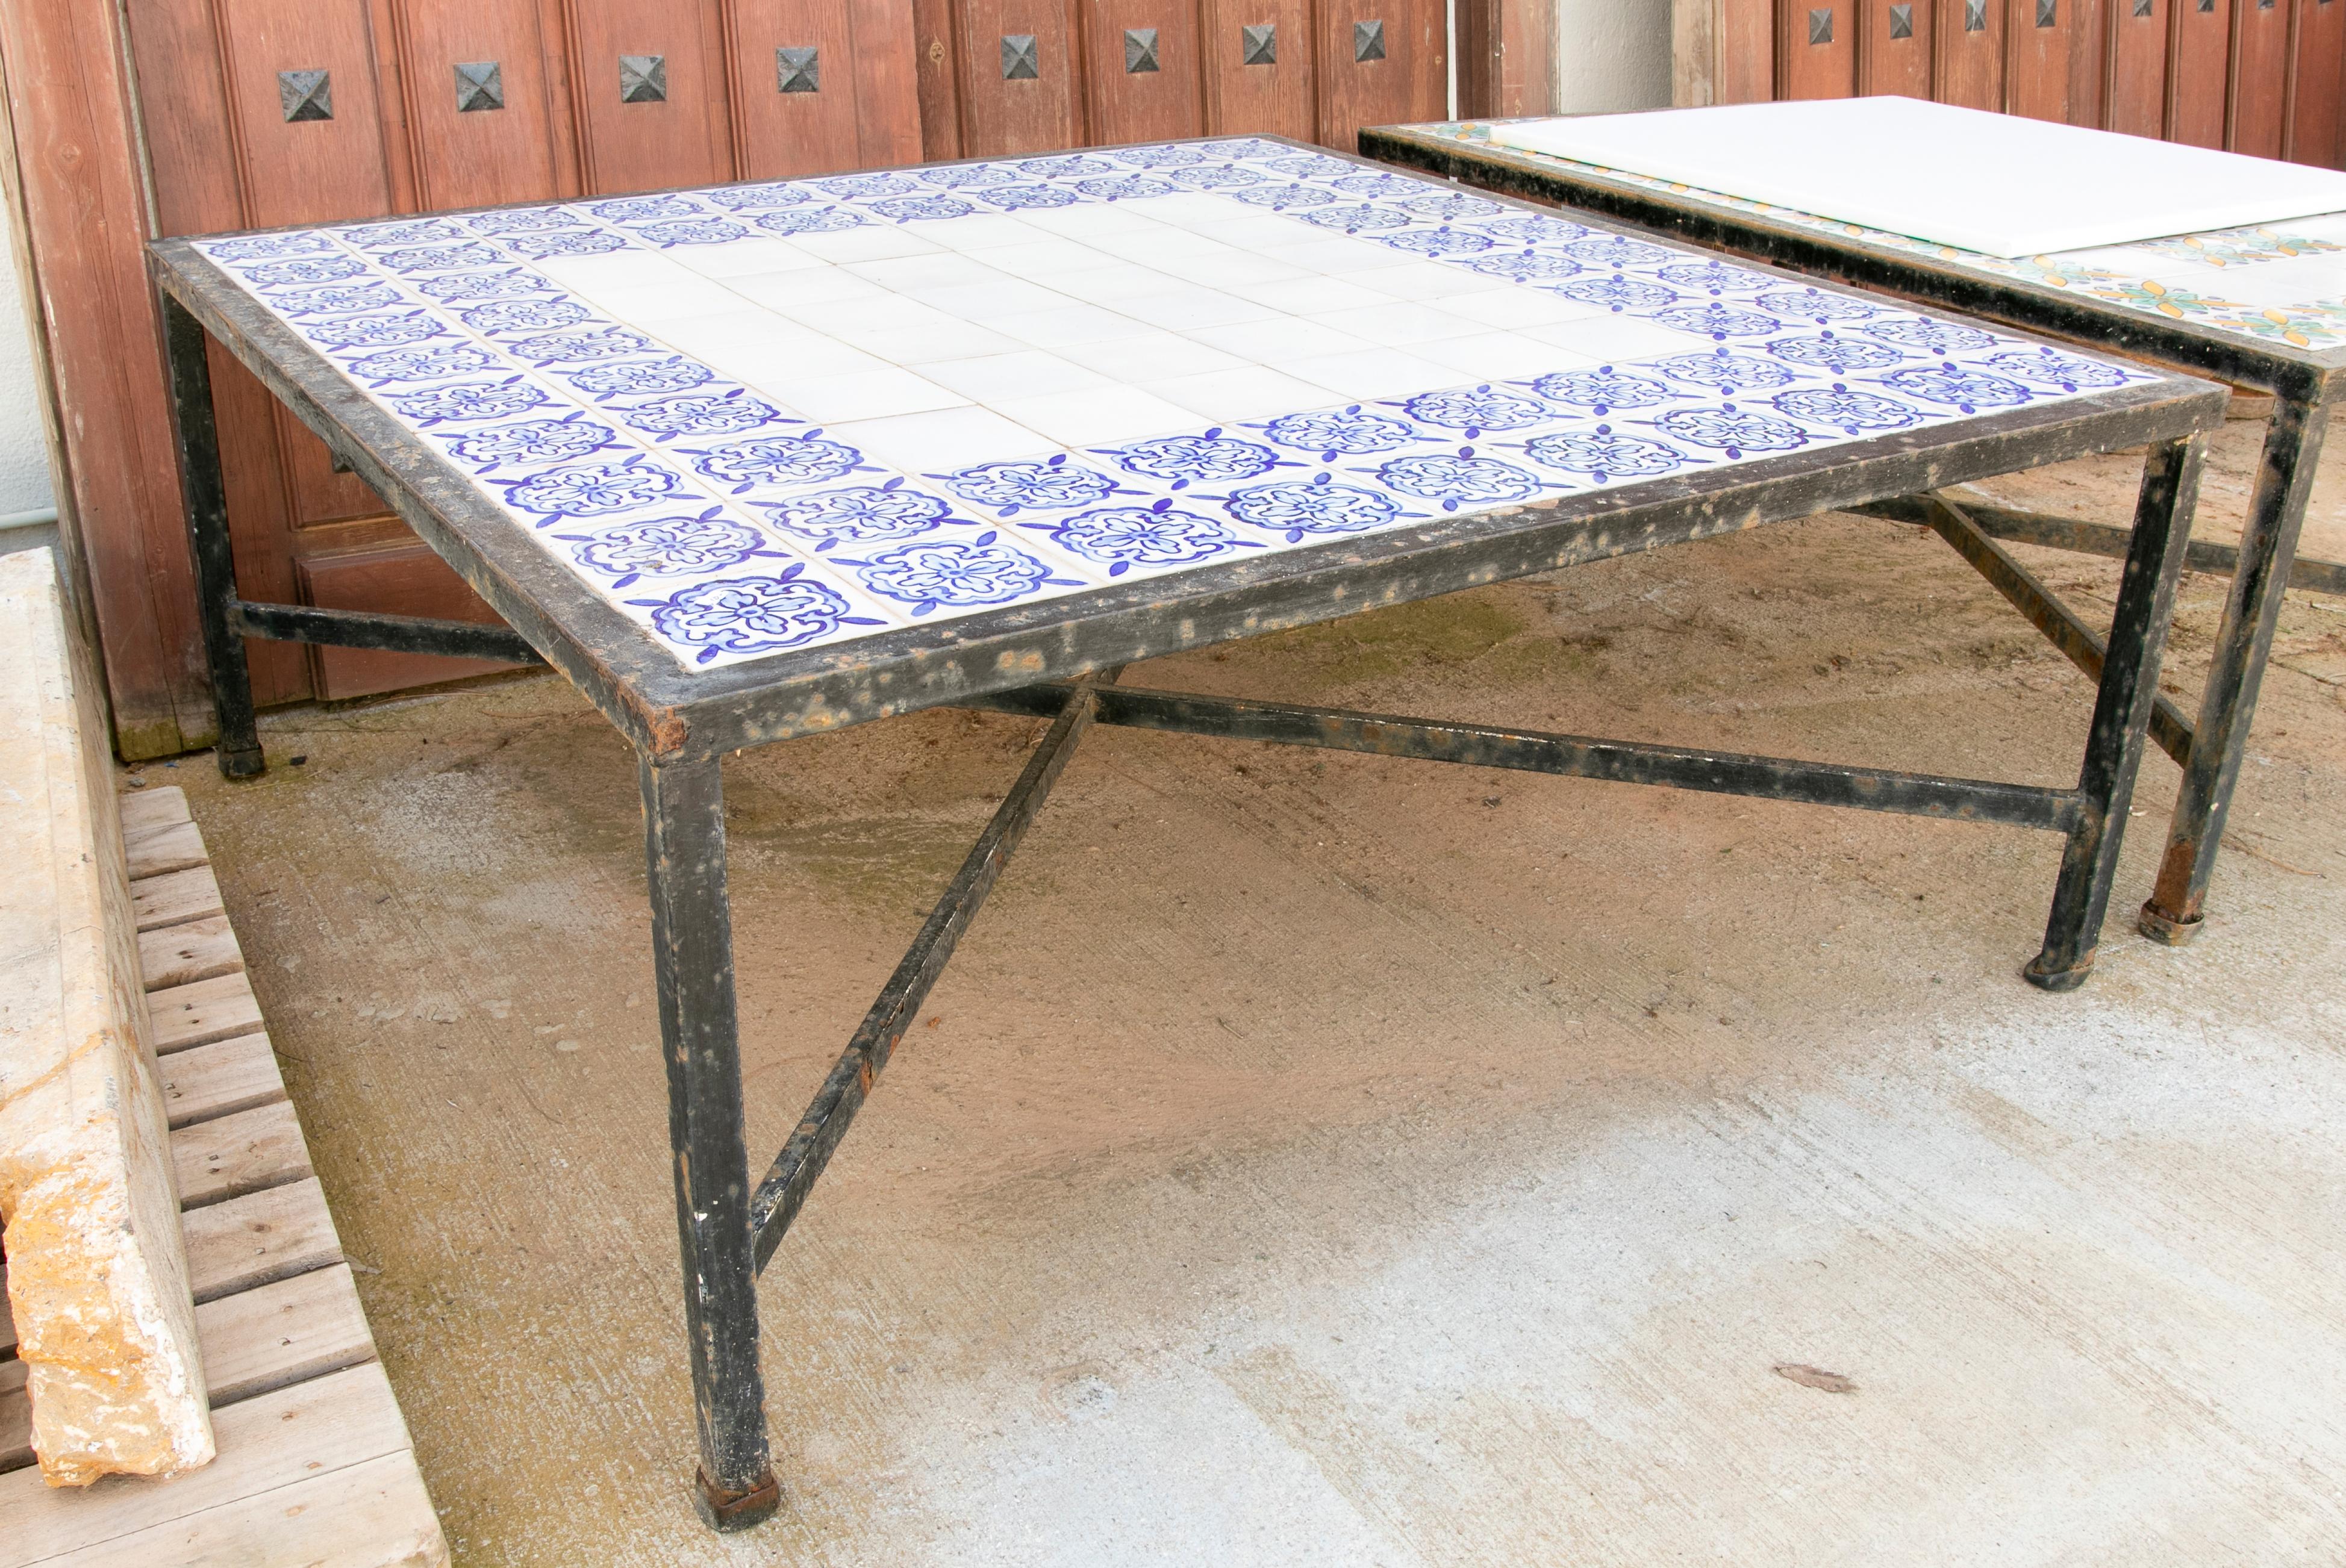 1980s Table with iron base and geometrical tiles on top.